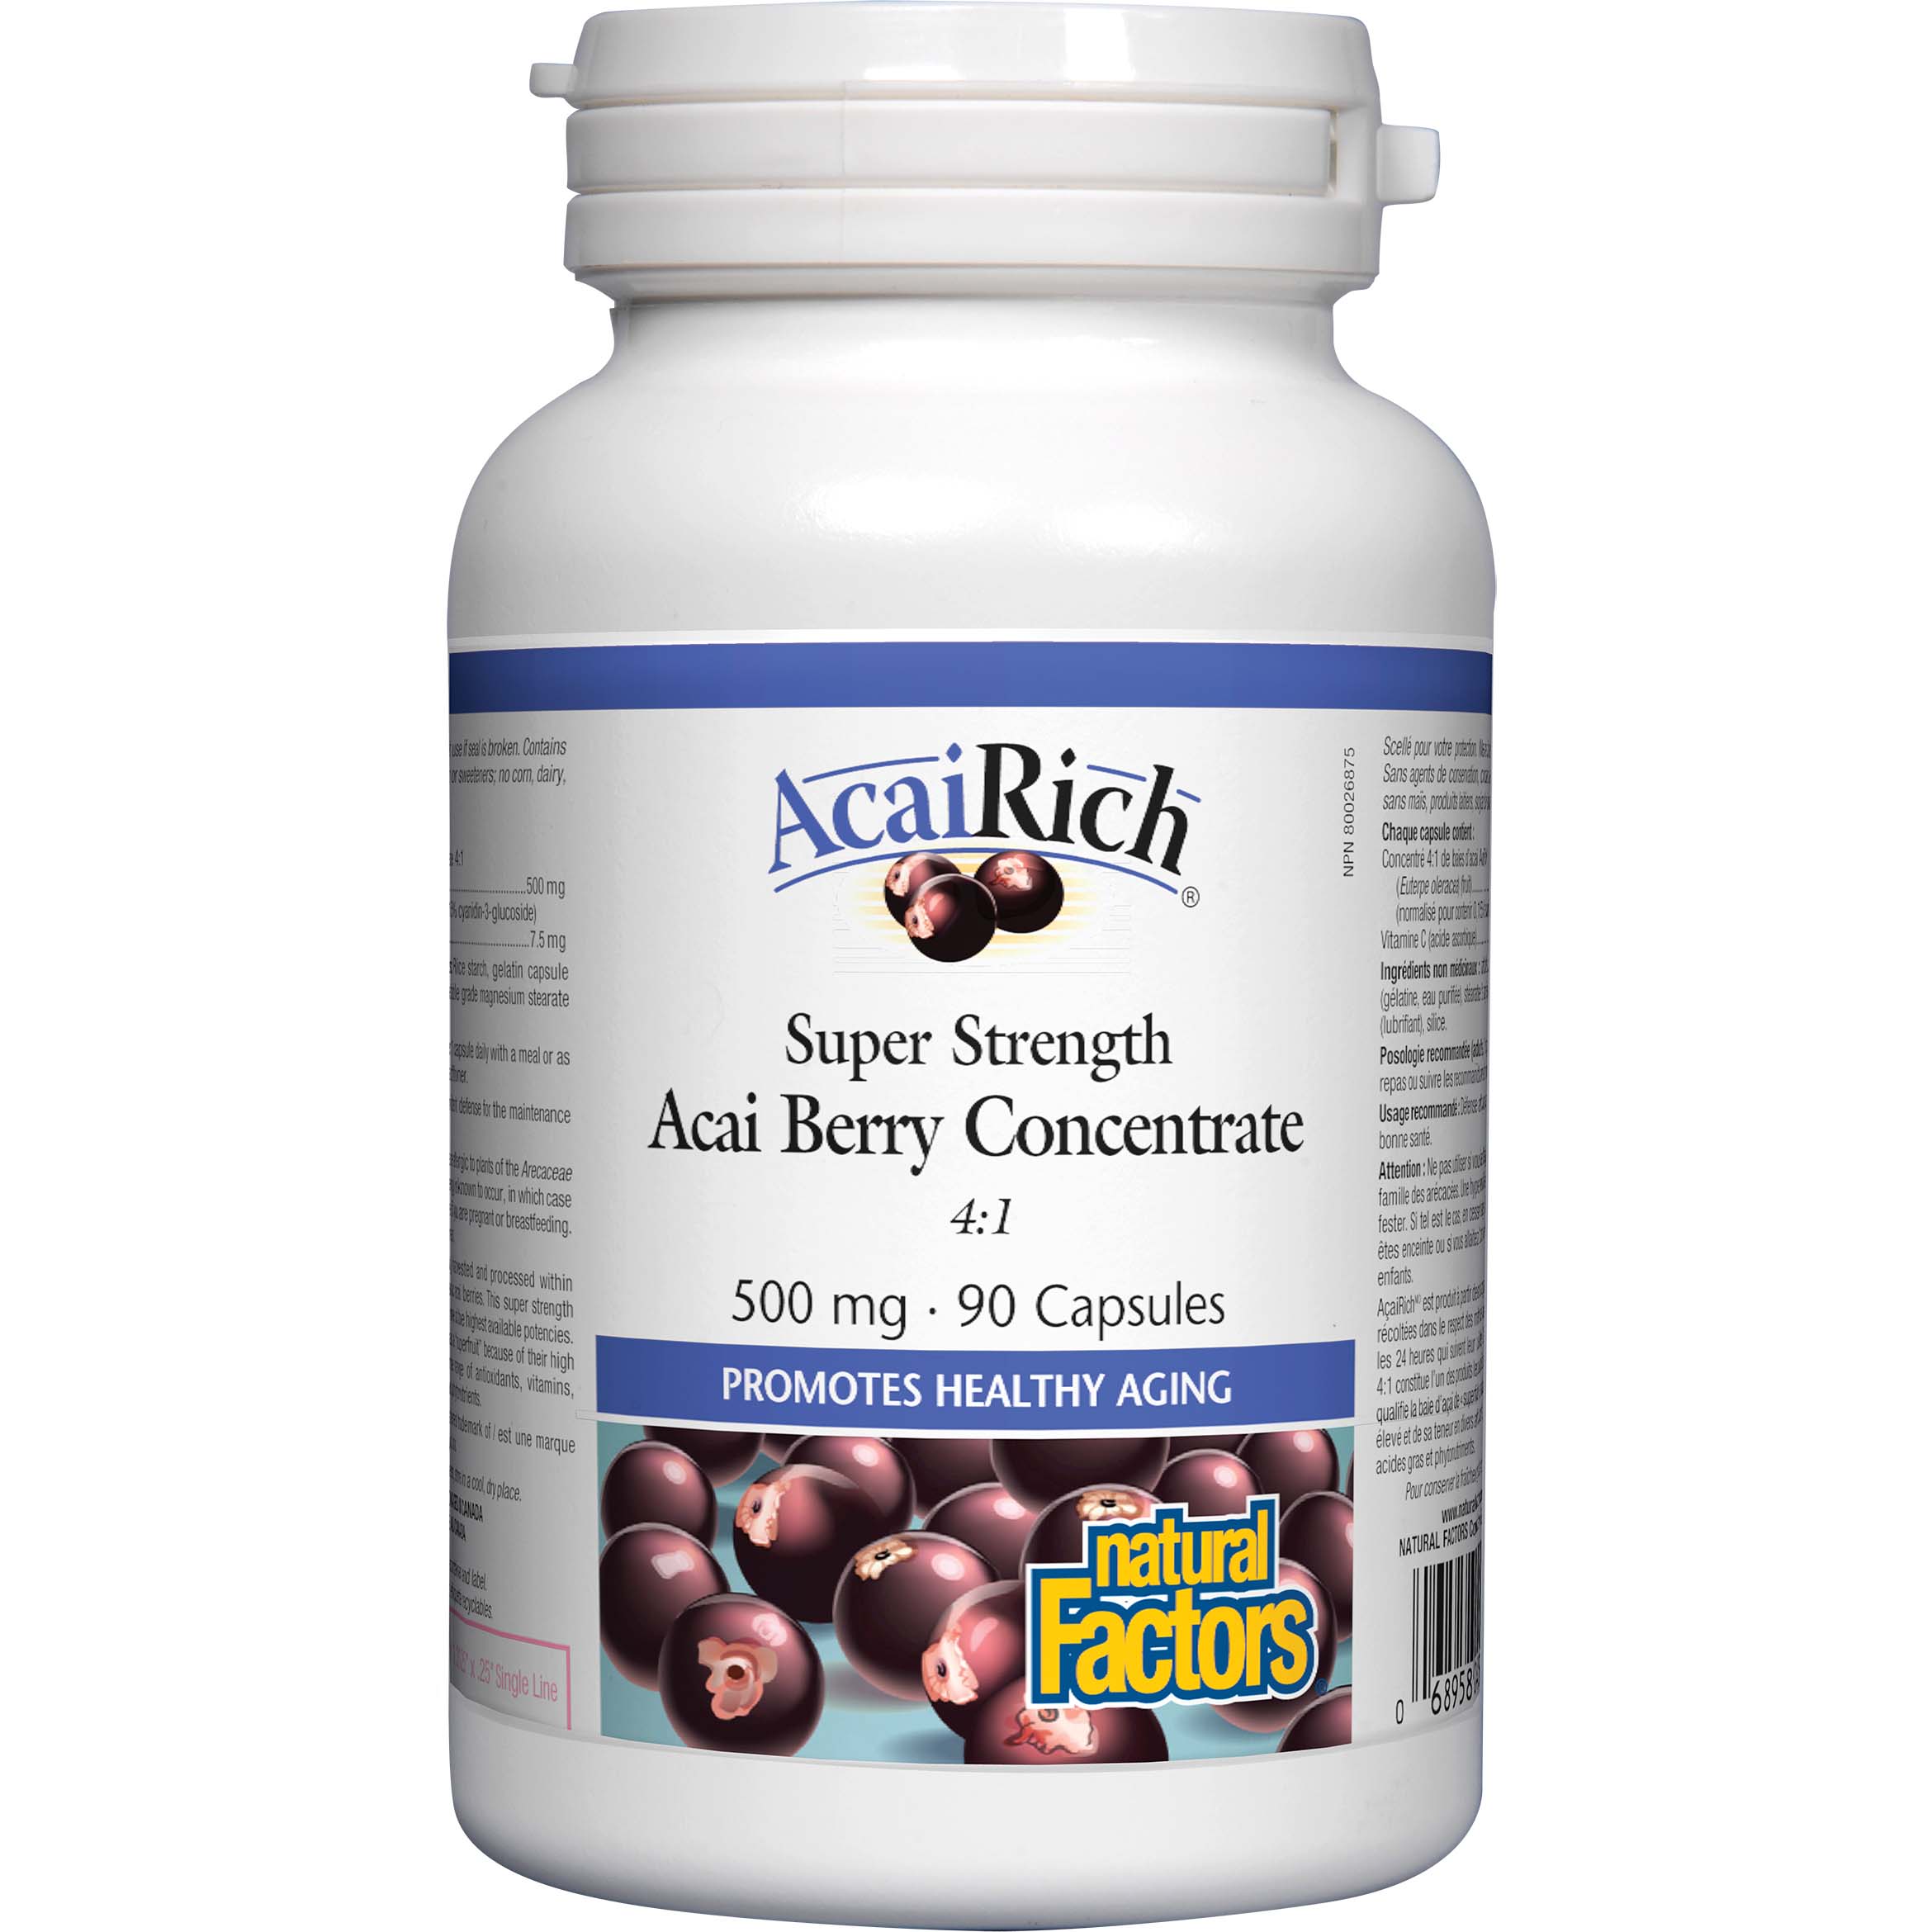 Natural Factors Super Strength Acai Berry Concentrate, 500 mg, 90 Capsules